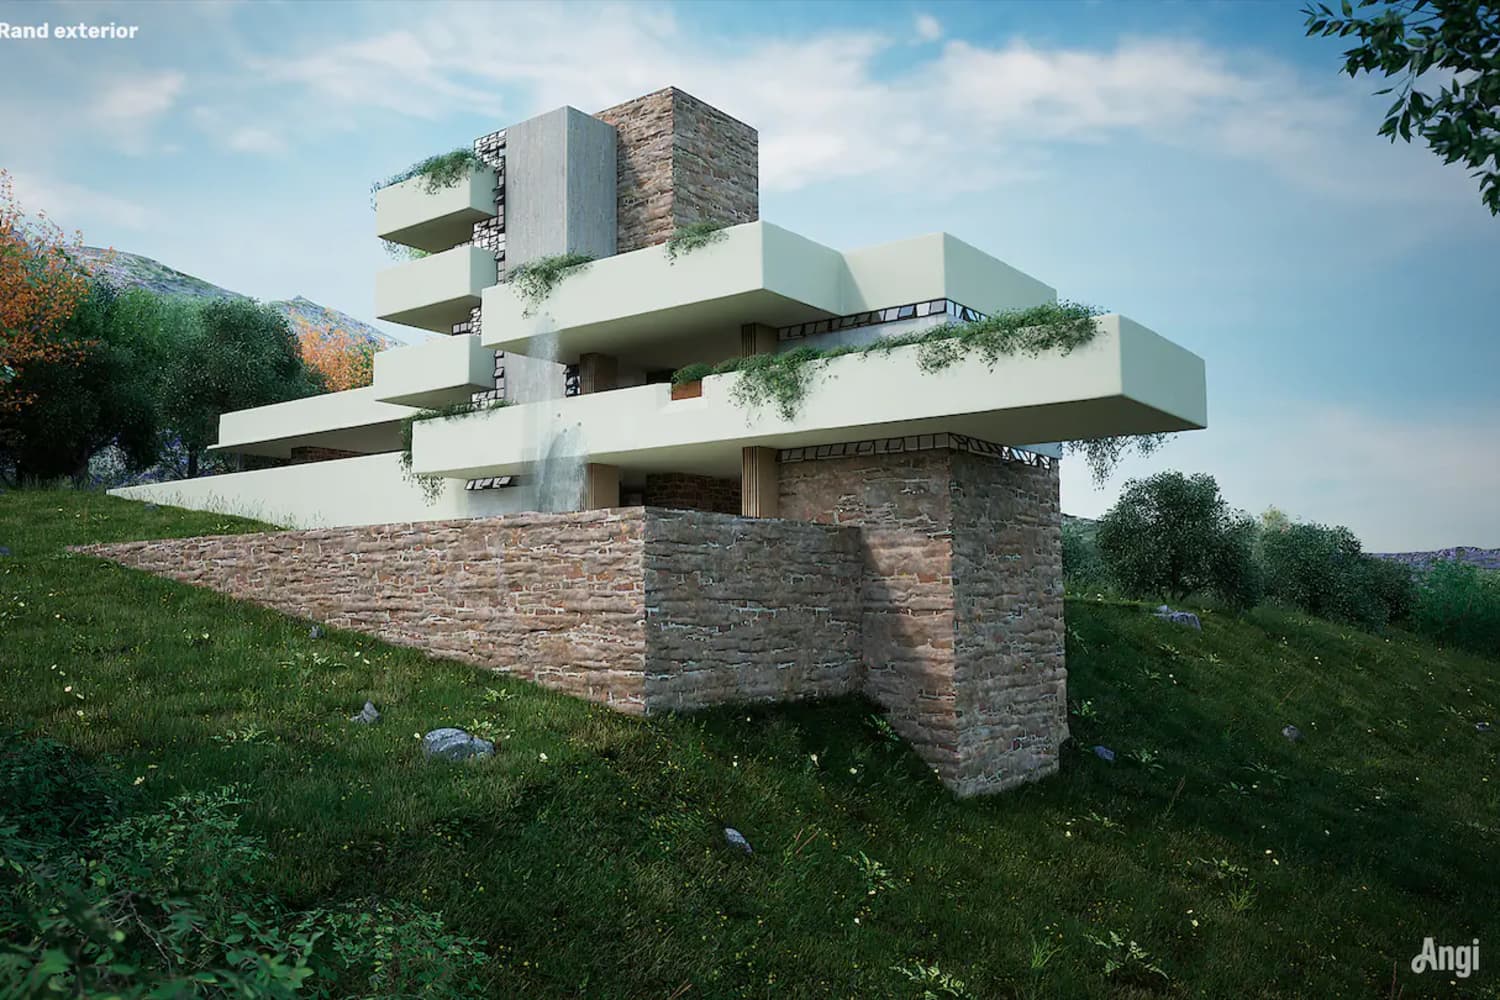 Check out 3 of Frank Lloyd Wright's Unbuilt Houses | Apartment Therapy